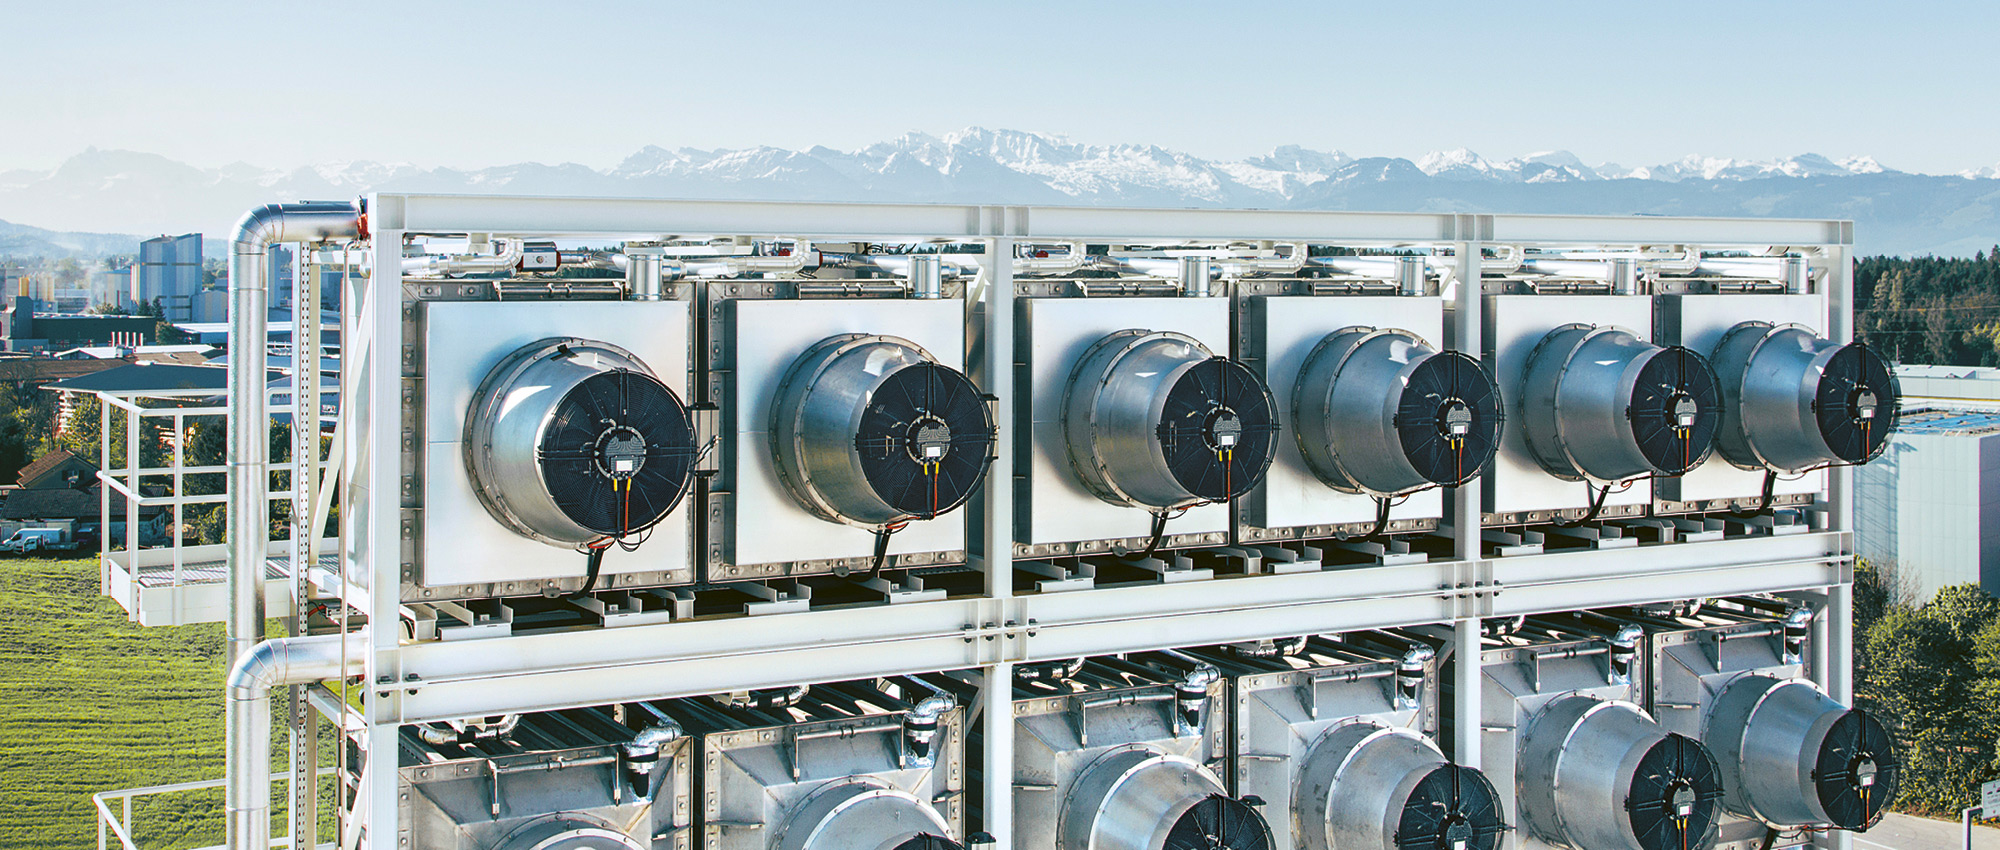 Close-up of ventilator installation ouside with mountains in the background